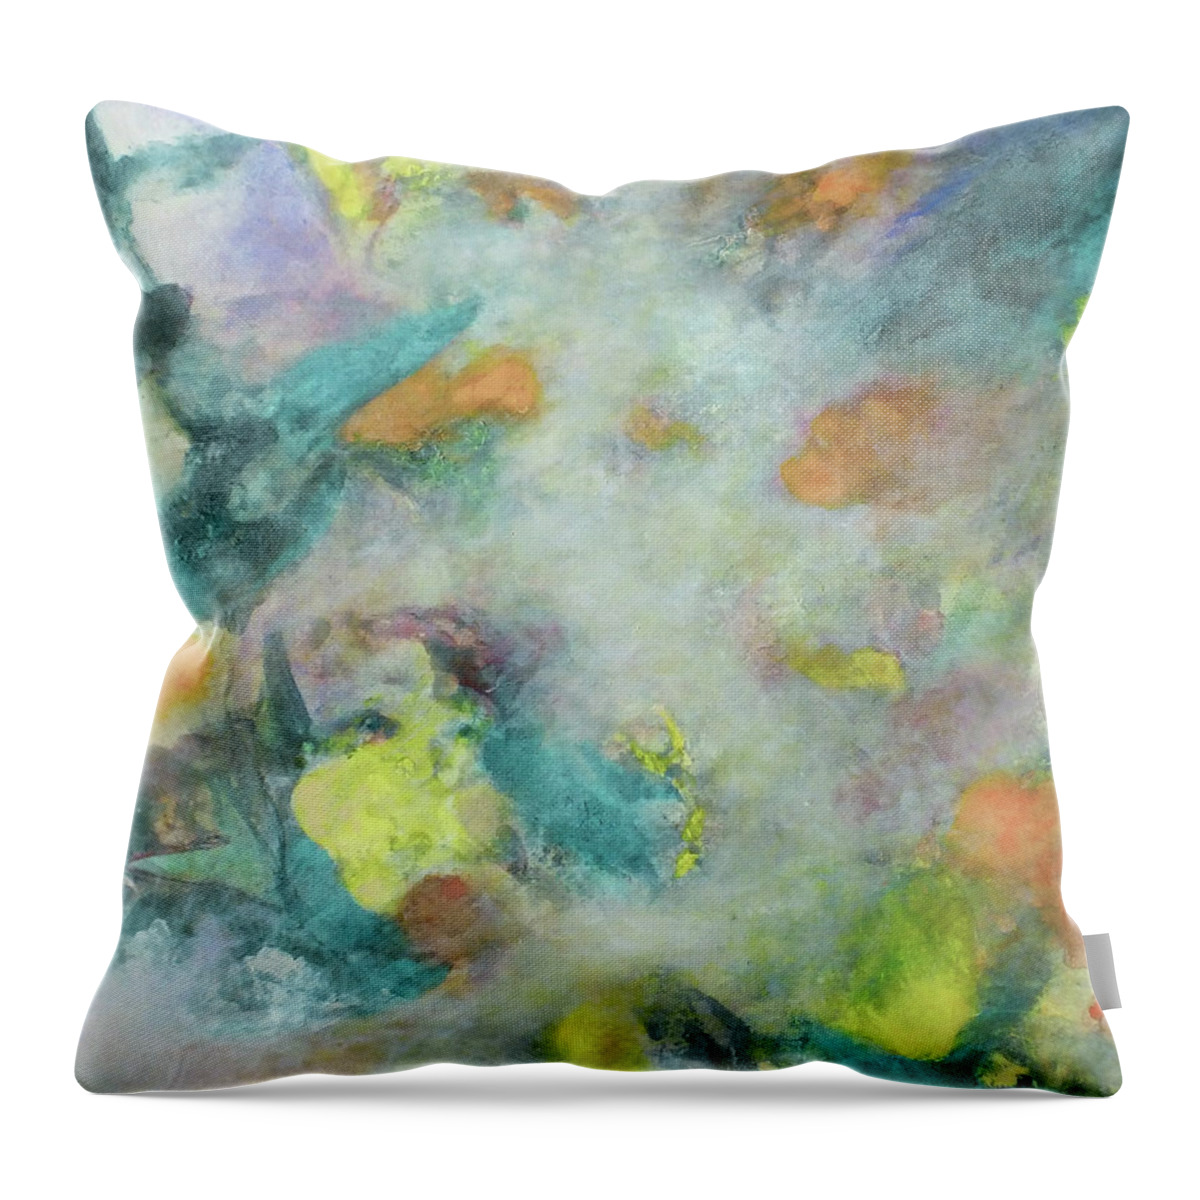 Fall Scene Throw Pillow featuring the painting Autumn Wind by Marc Dmytryshyn